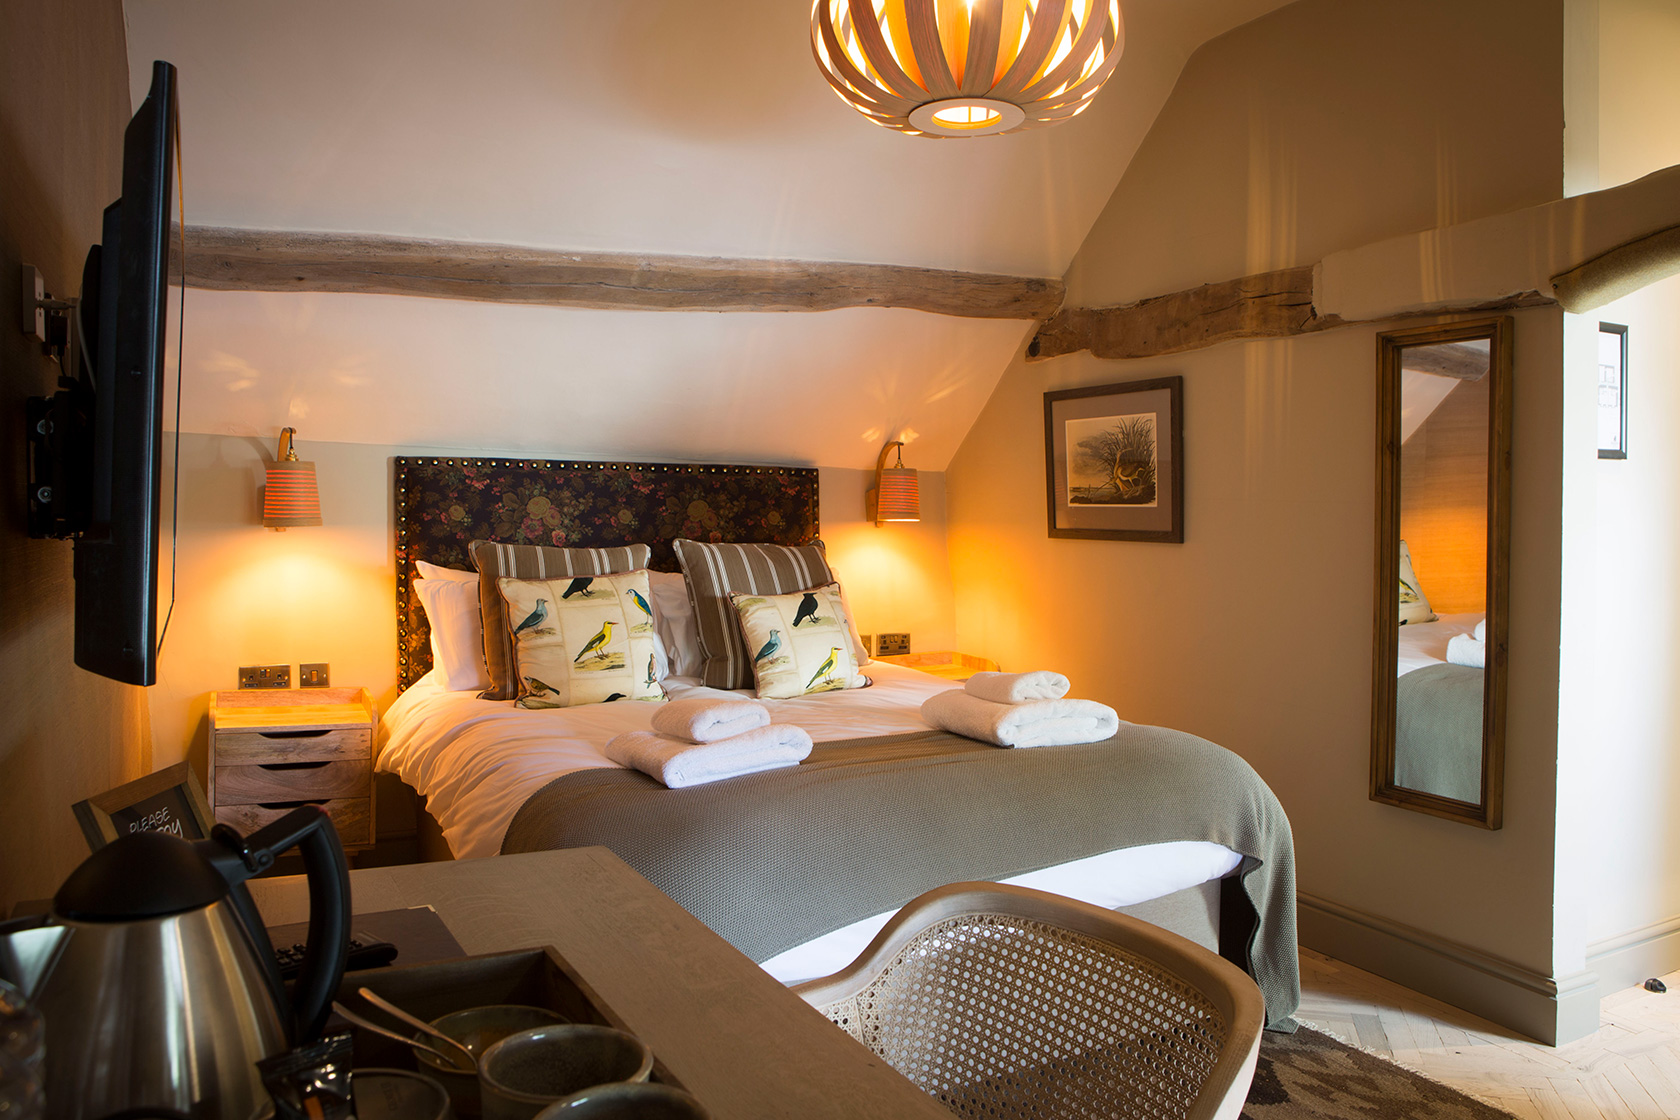 Our rear view room offers a great value stay at one of the best hotels and pubs near Snowdonia National Park